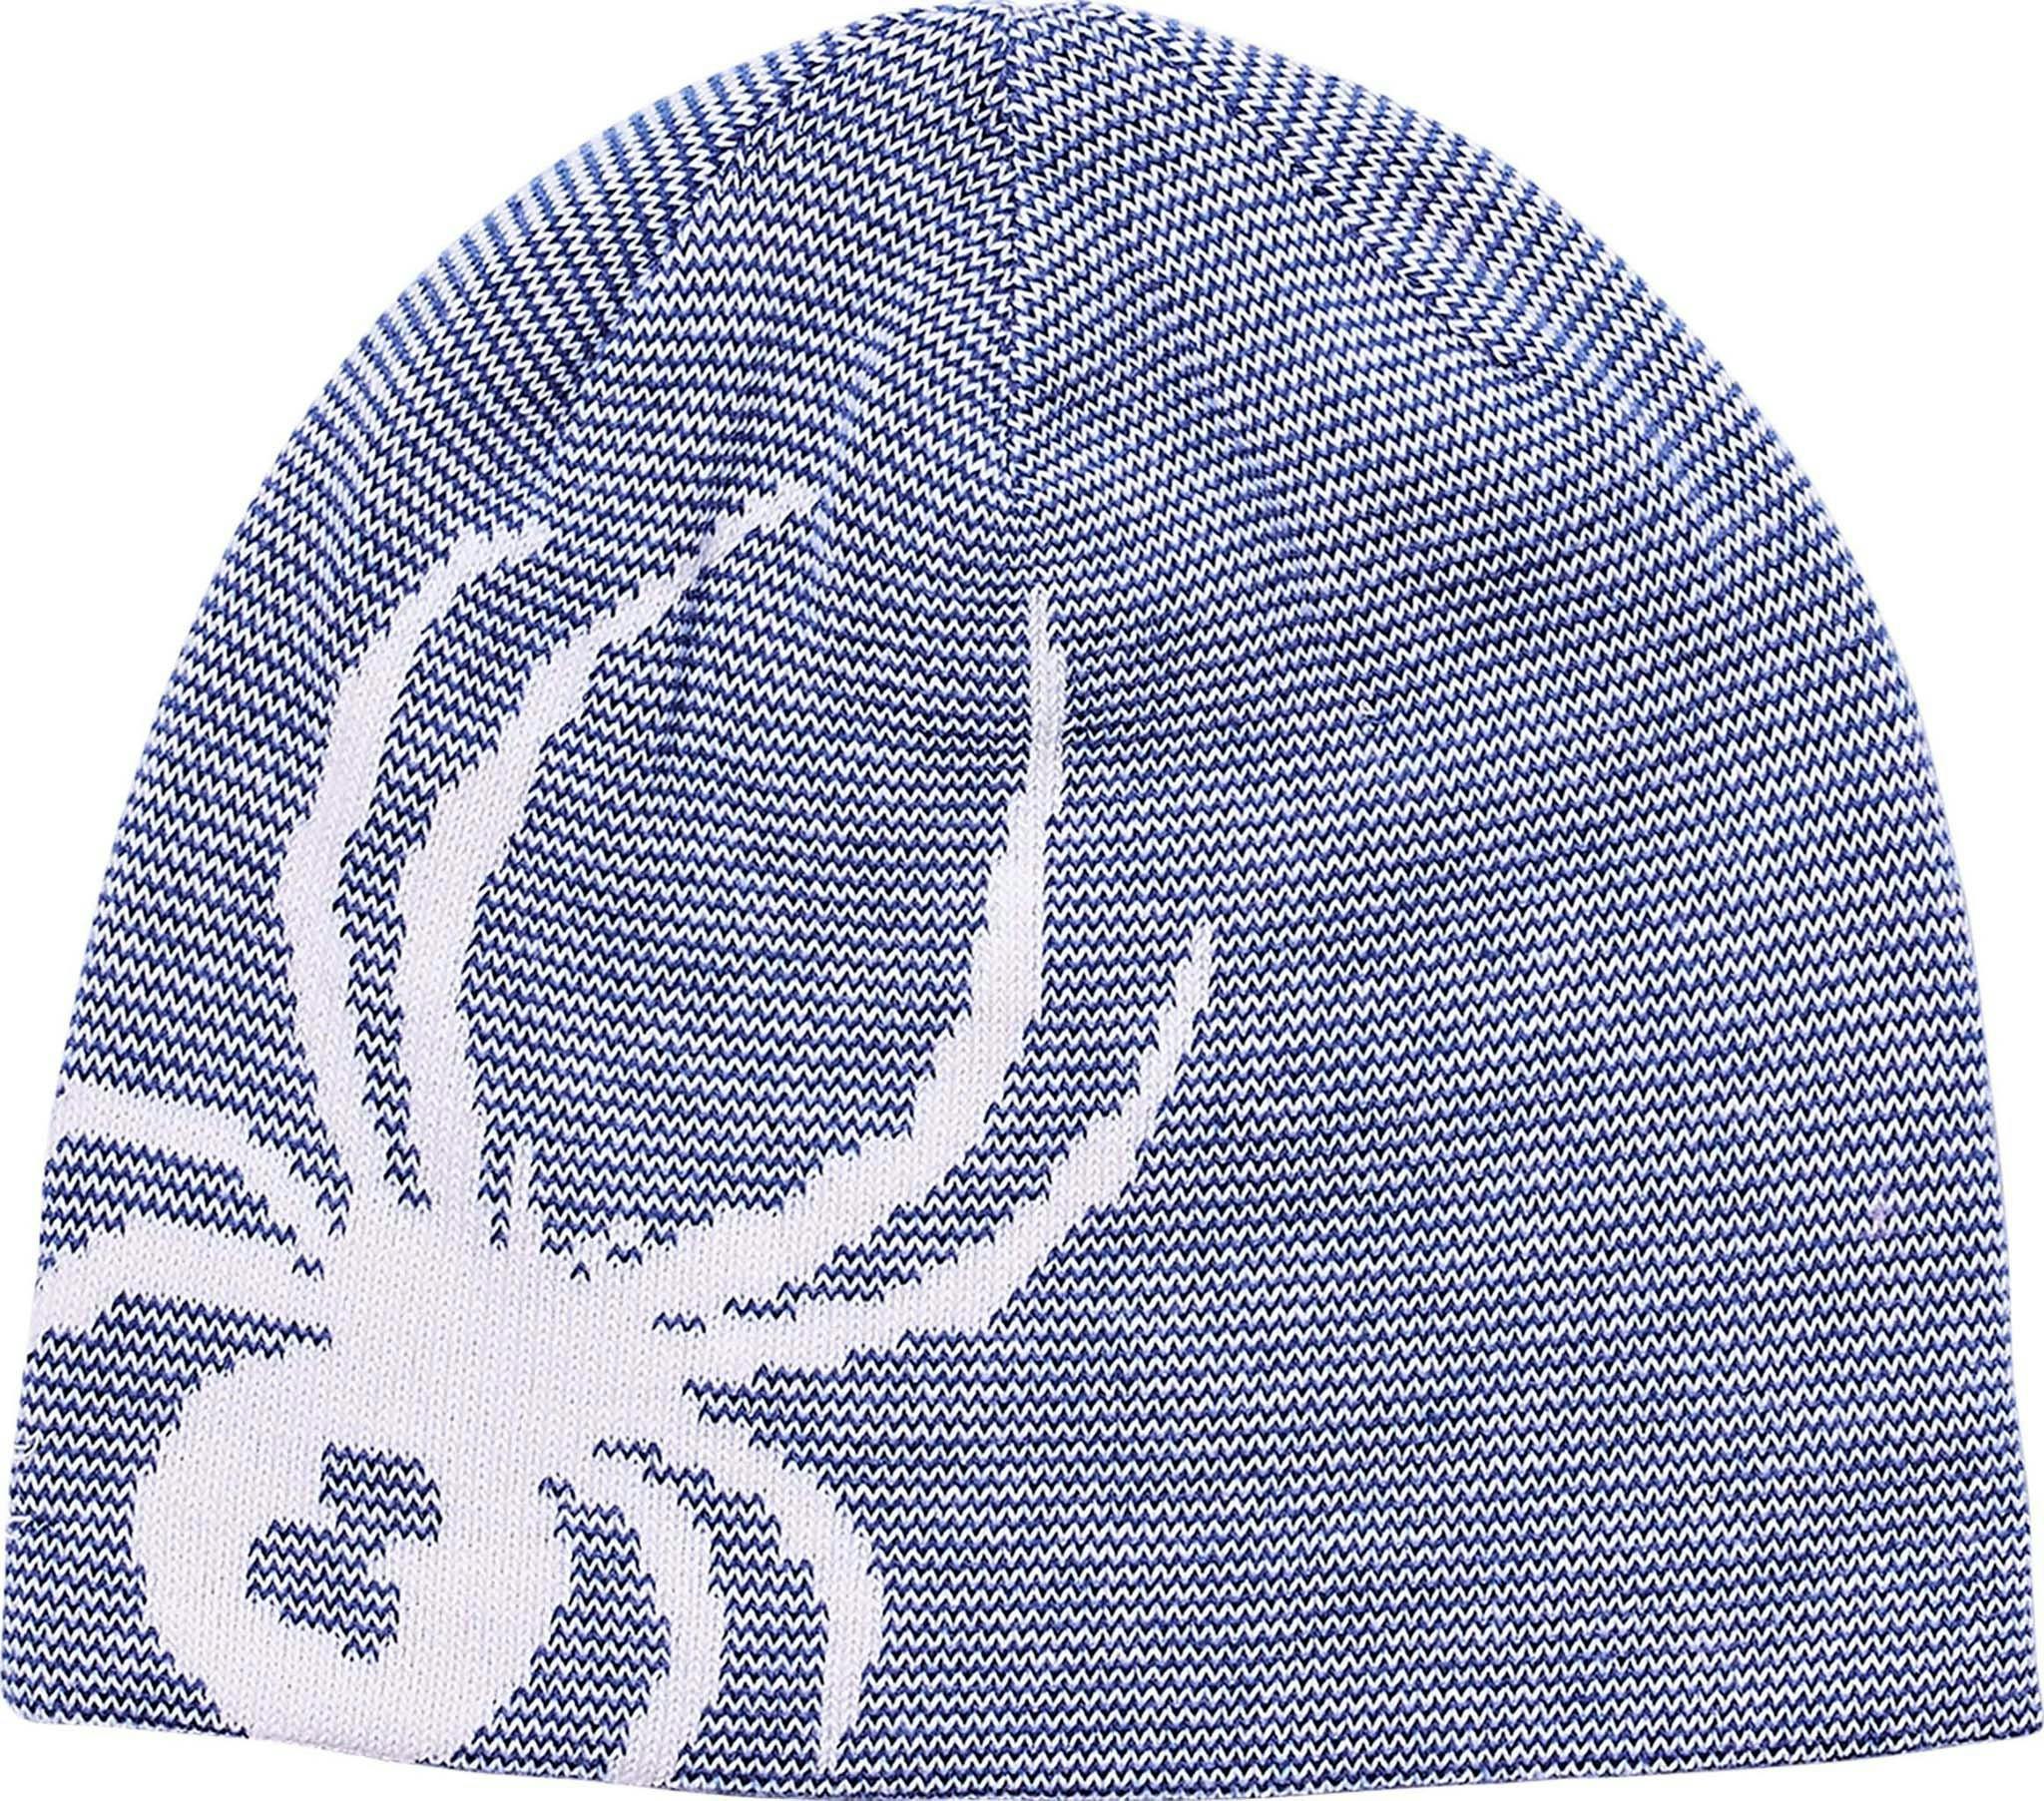 Product image for Reversible Bug Hat - Boys